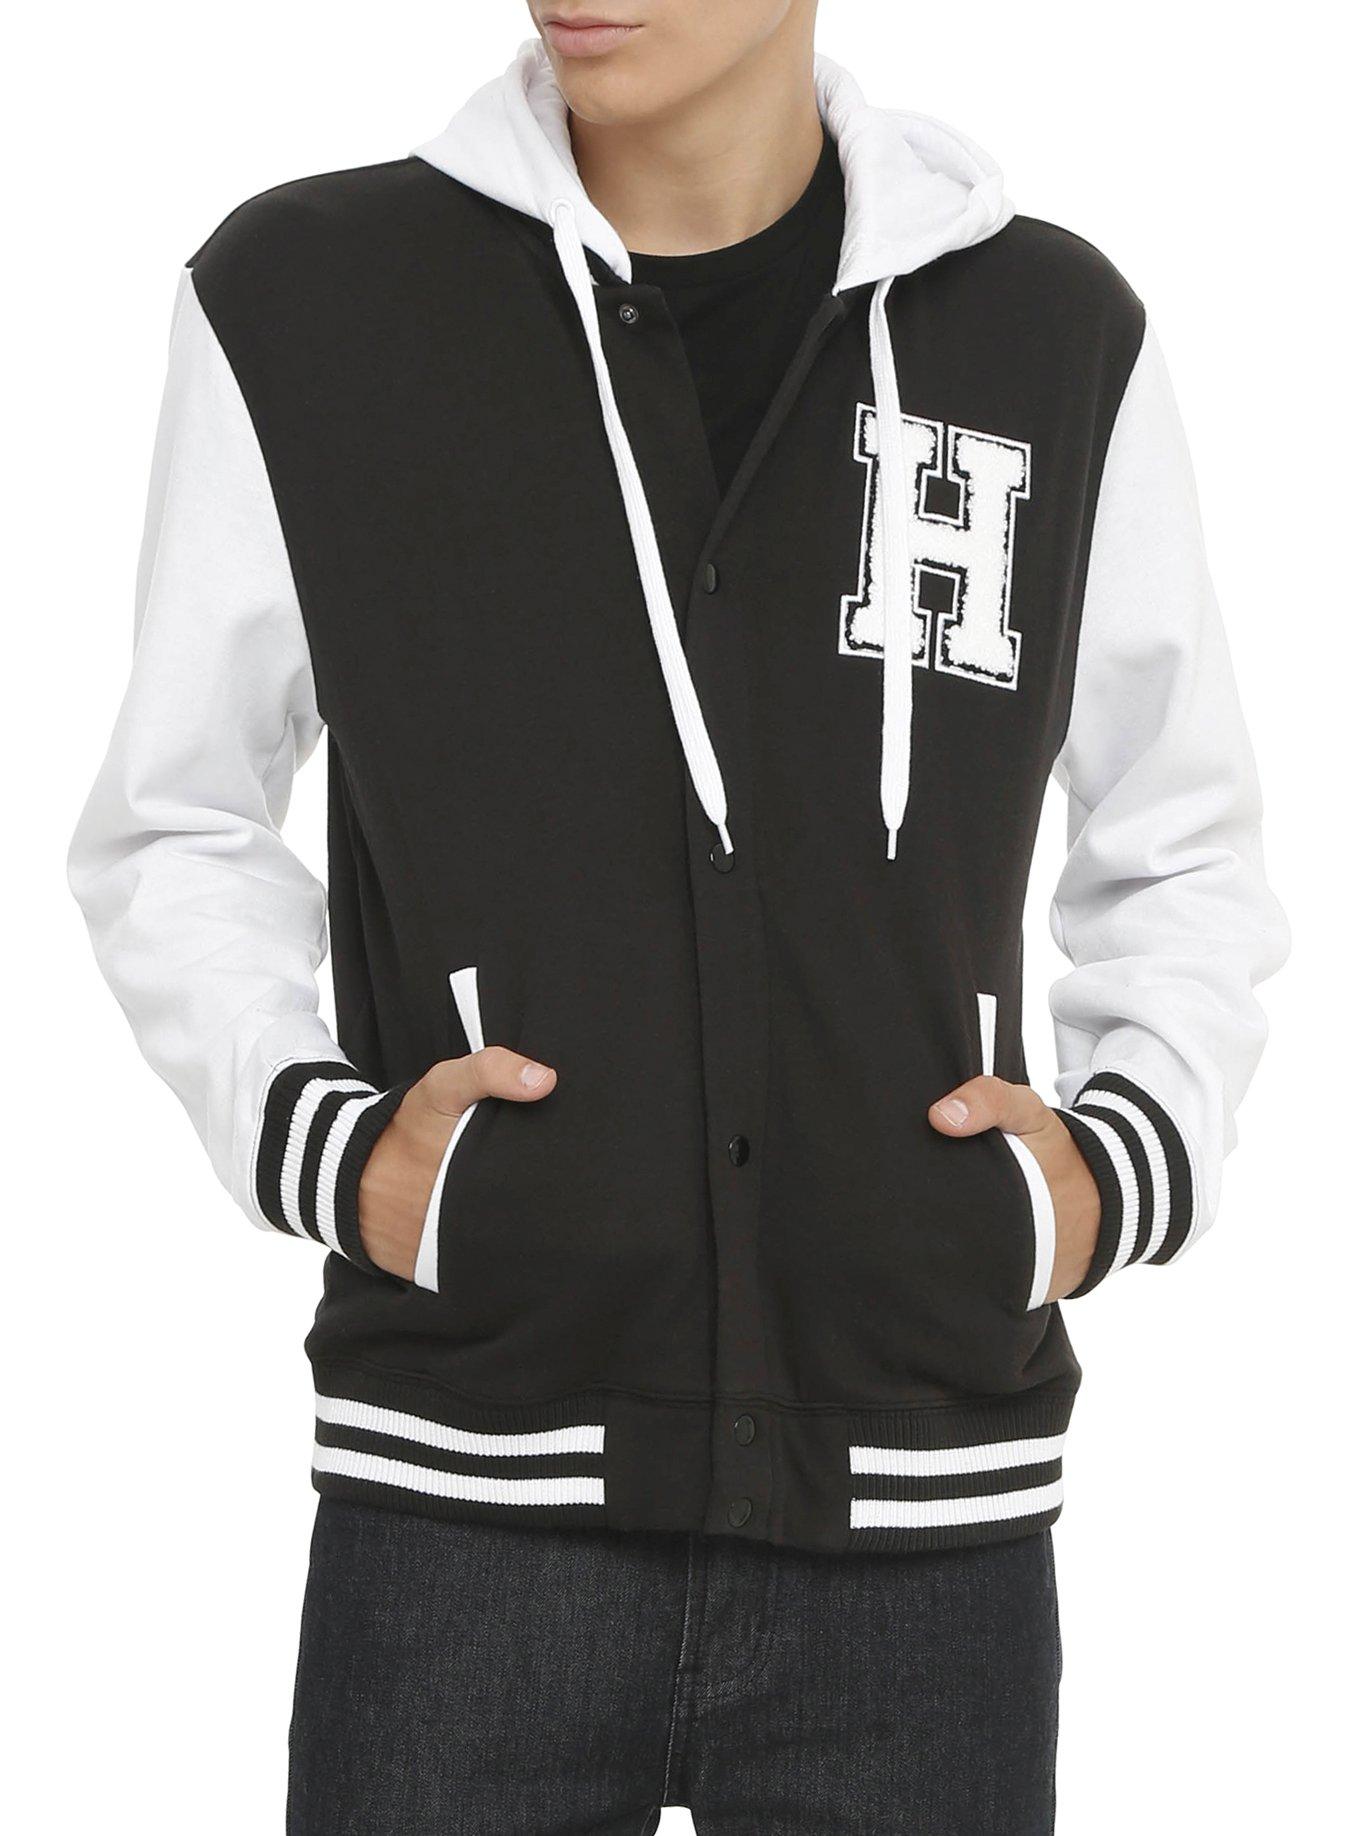 Huf 20 Year Classic H Varsity Jacket Special Edition in Kelly - Size M